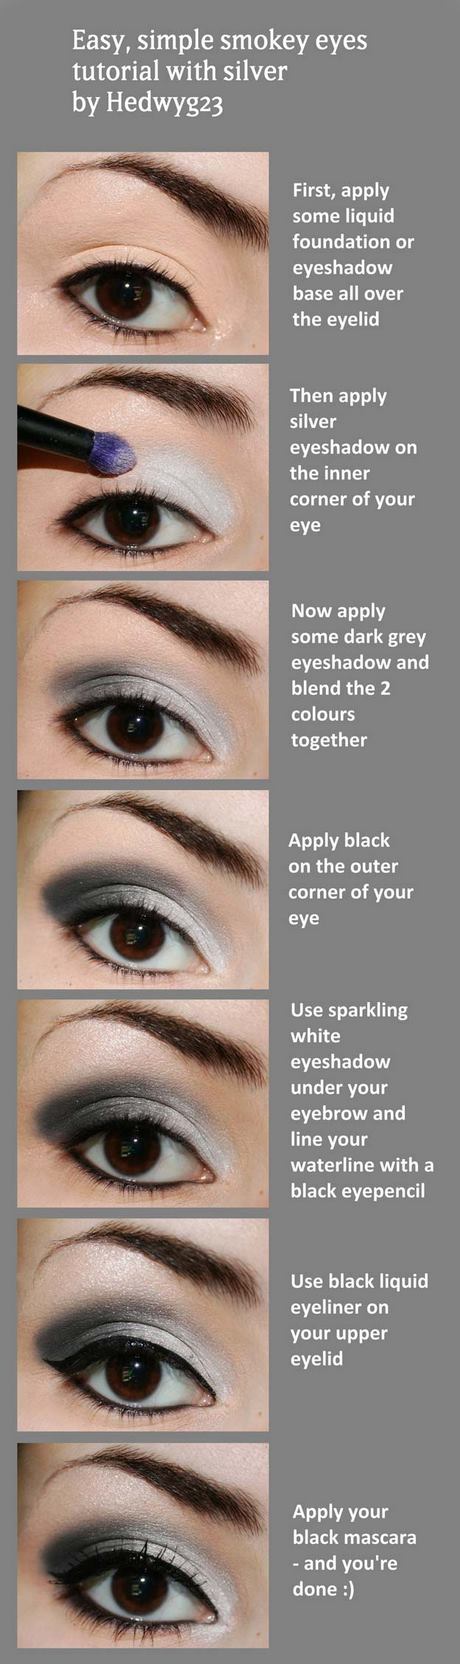 how-to-do-perfect-eye-makeup-34_15 Hoe perfect oog make-up te doen